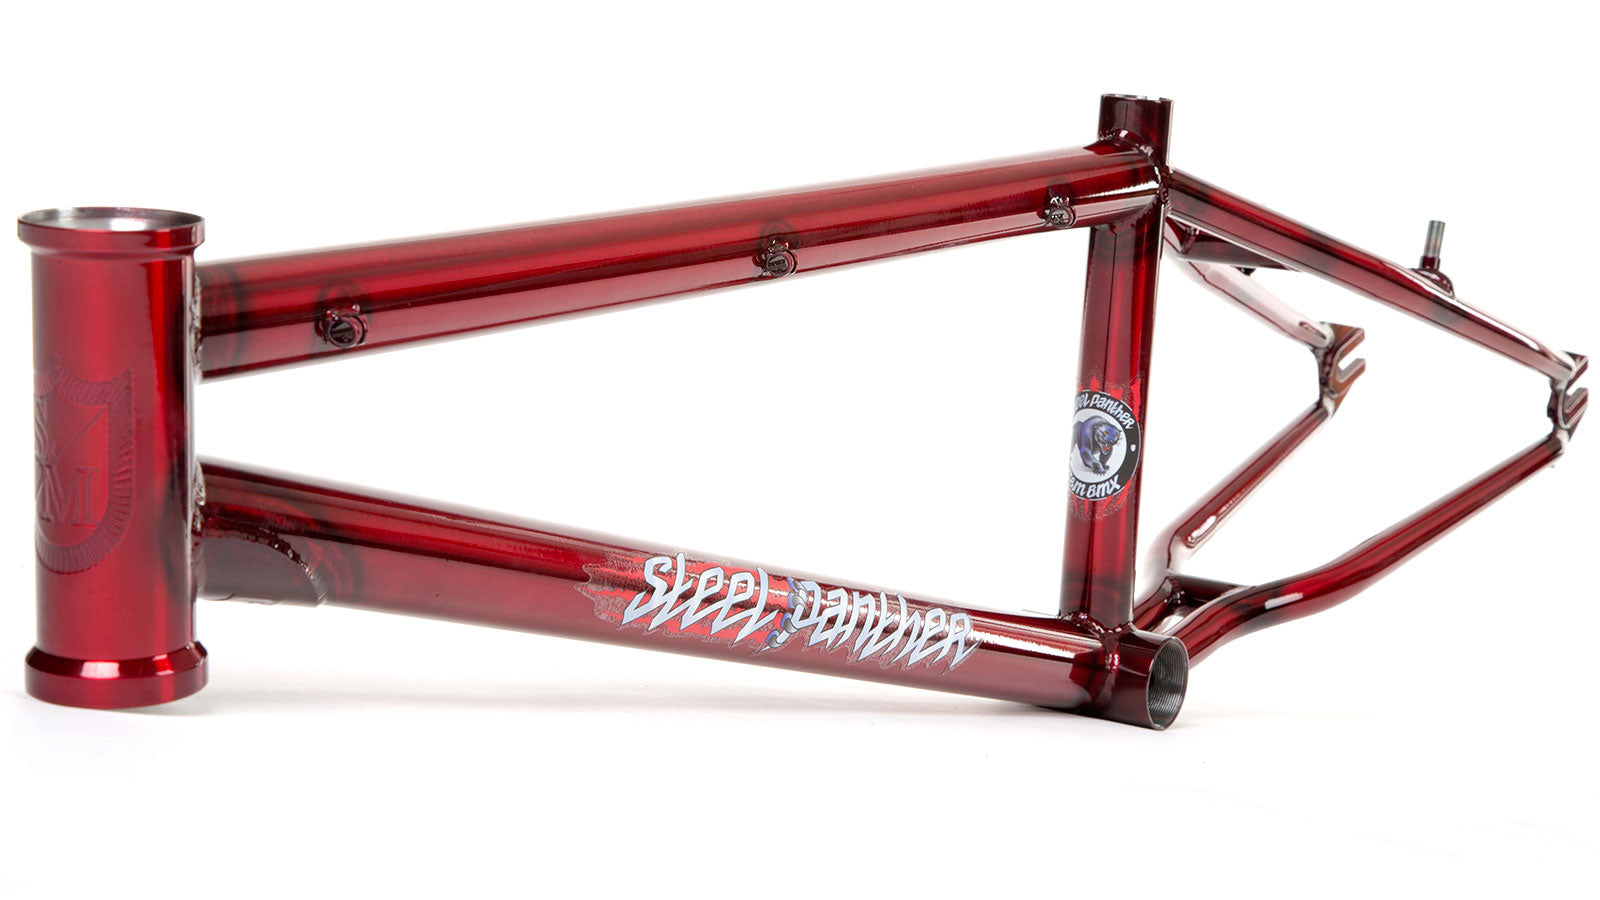 STEEL PANTHER FRAME 2" TRANS RED